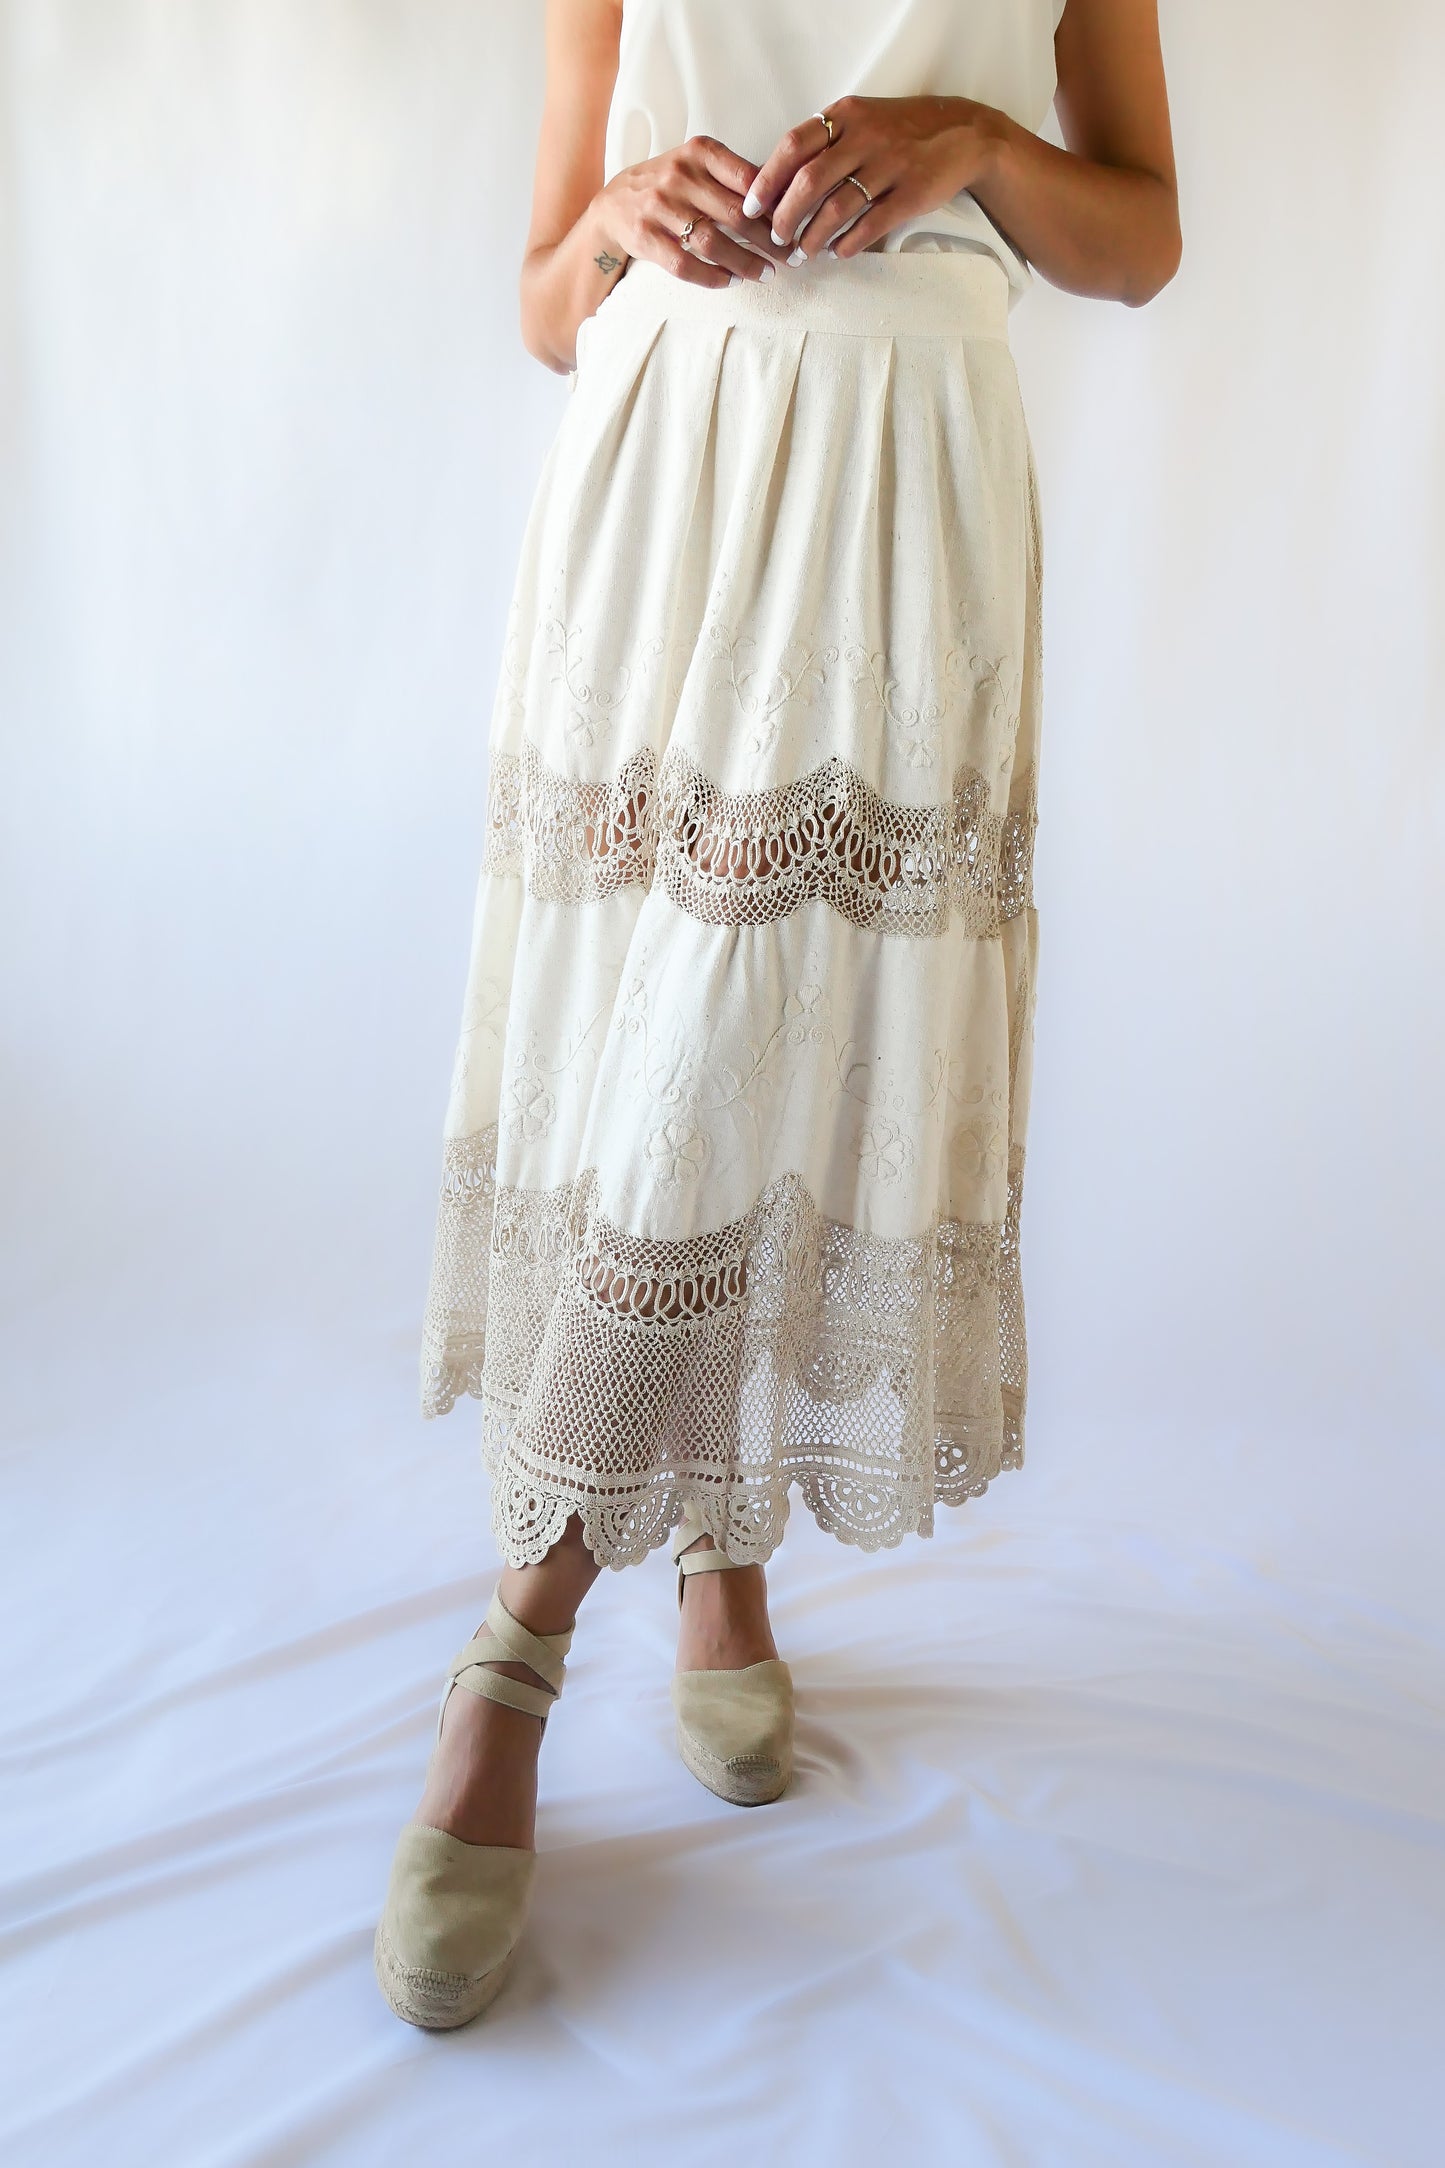 Picture yourself strolling through a sunlit Mediterranean village in this beautiful raw silk maxi skirt - an original Lim's skirt from the 1990s - with hand embroidered floral embellishments and hand crocheted trim.  This skirt has a fitted, non-elastic waistband and is semi-pleated at the waist with three crochet buttons going up the side of the skirt.  Measurements:  Fits a size XS to Small Waist 26" Skirt length 33", hip 50"  Color: Natural Material: Raw silk and cotton